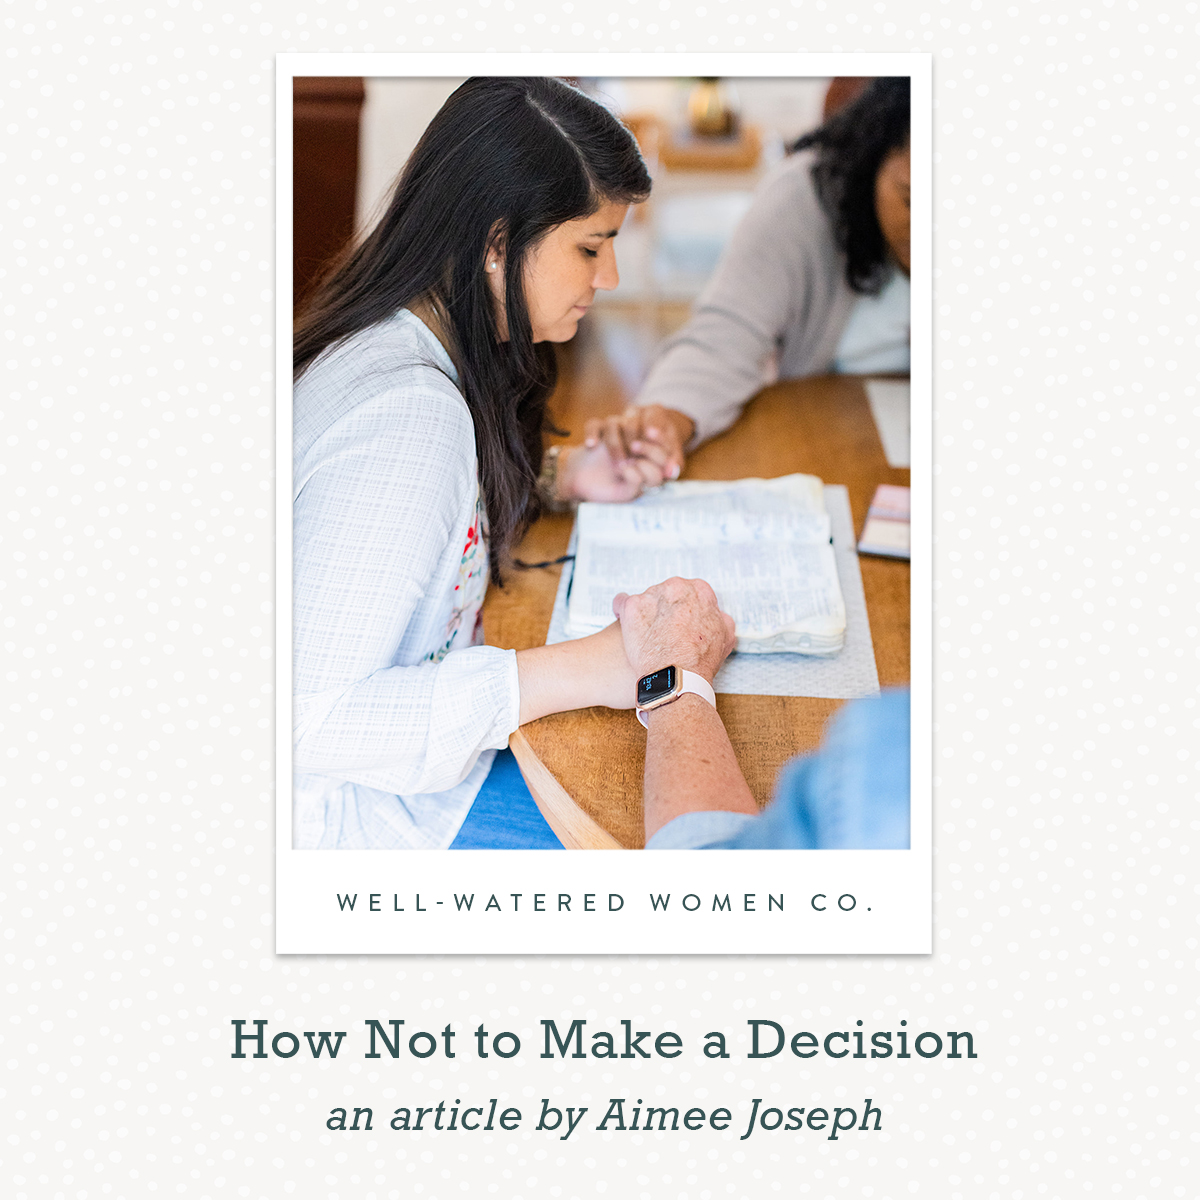 How Not to Make a Decision-an Article from Well-Watered Women